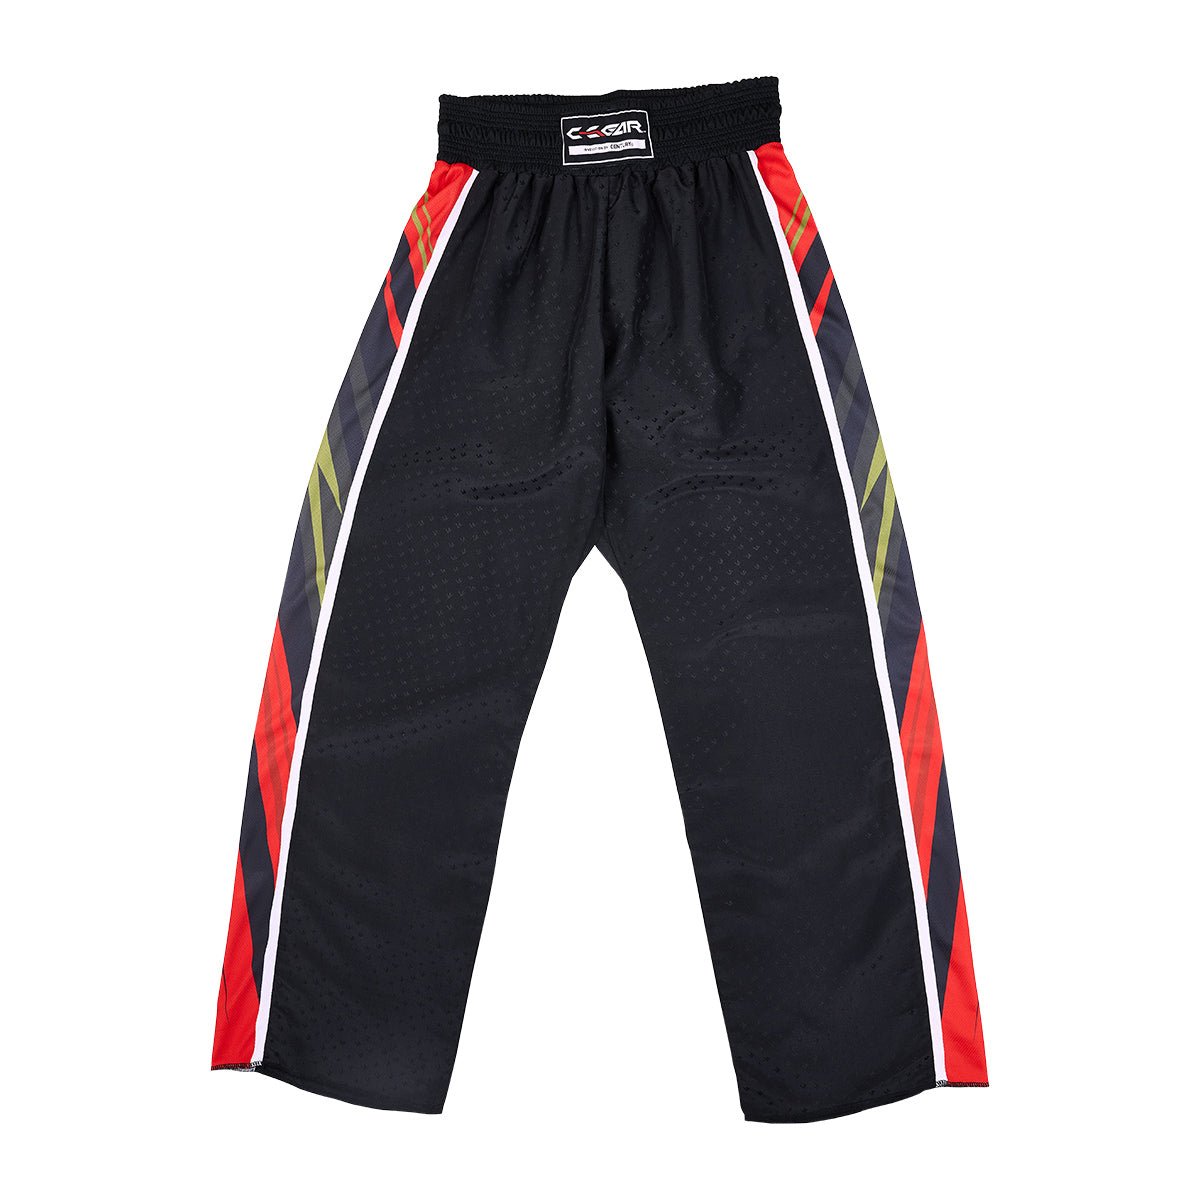 C-Gear Integrity Pant Black Red